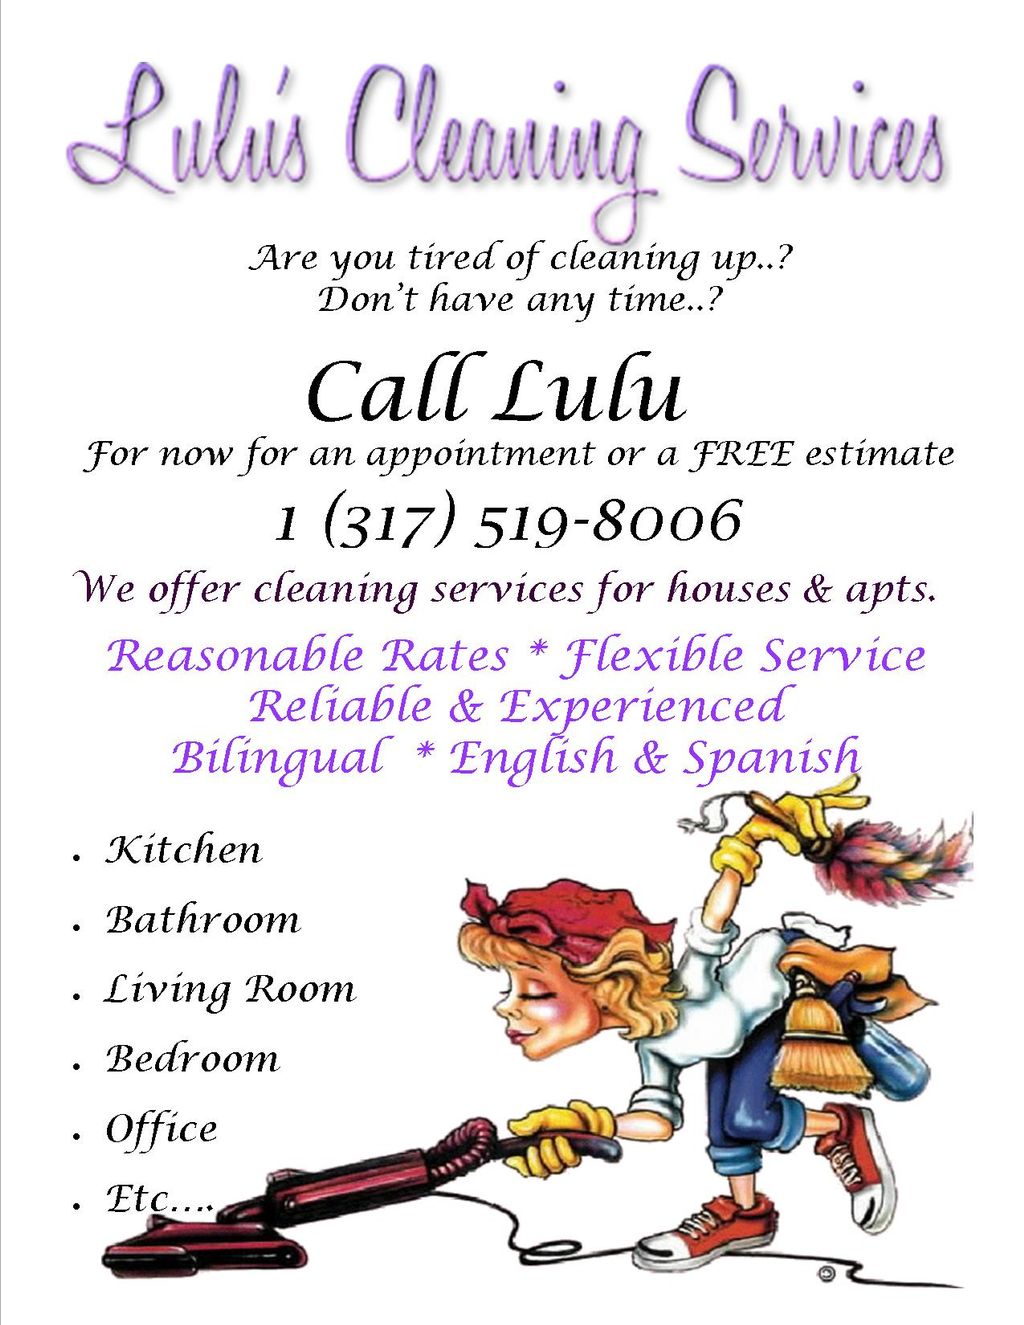 Lulu's Cleaning Services